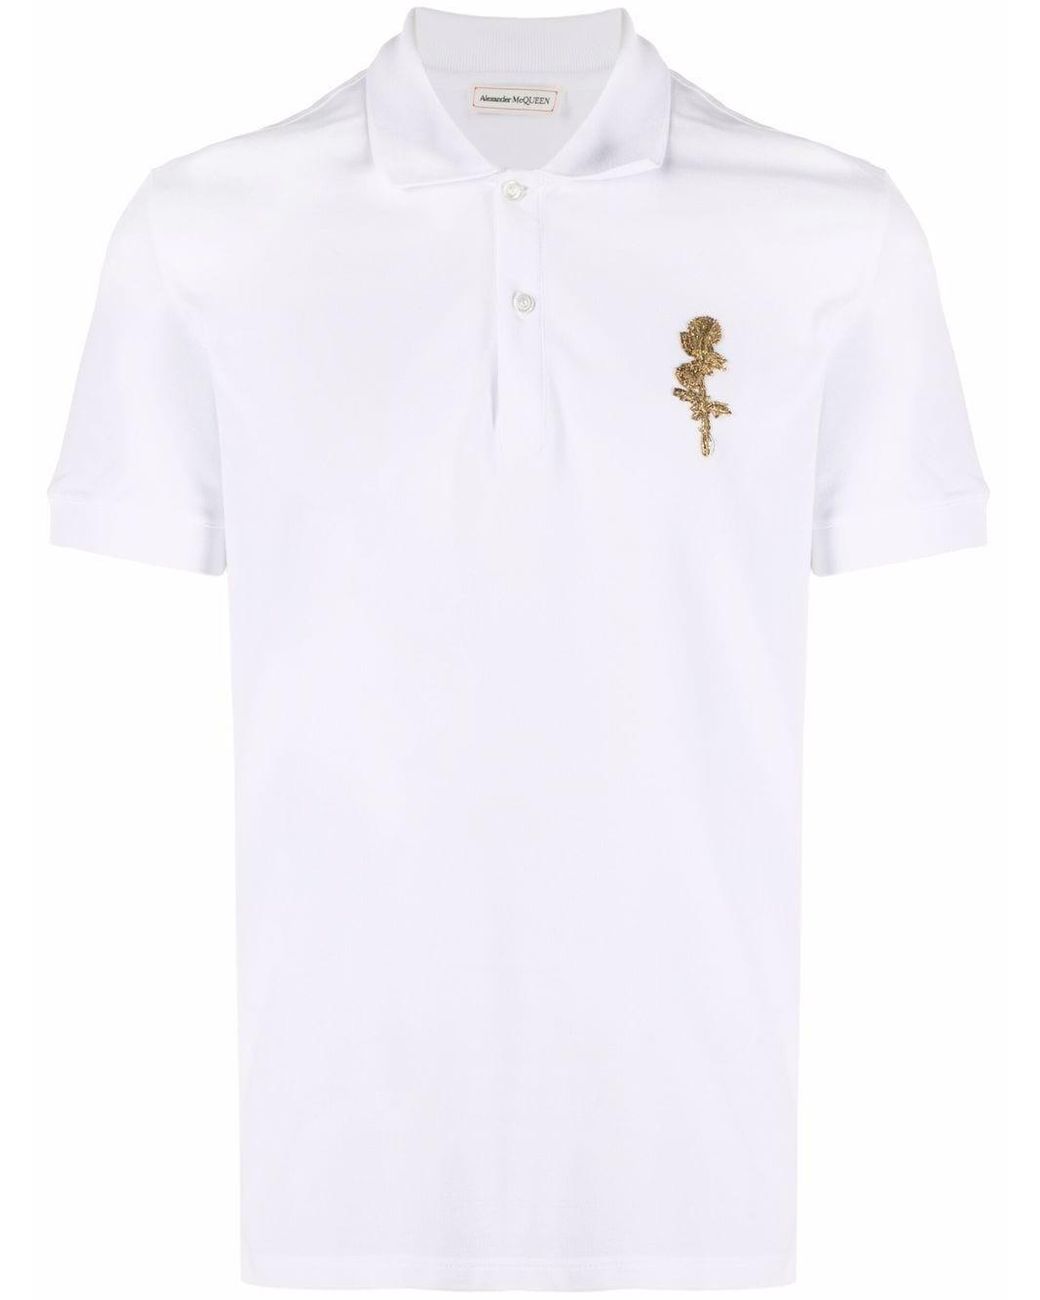 Alexander McQueen Embroidered-detail Polo Shirt in White for Men - Lyst